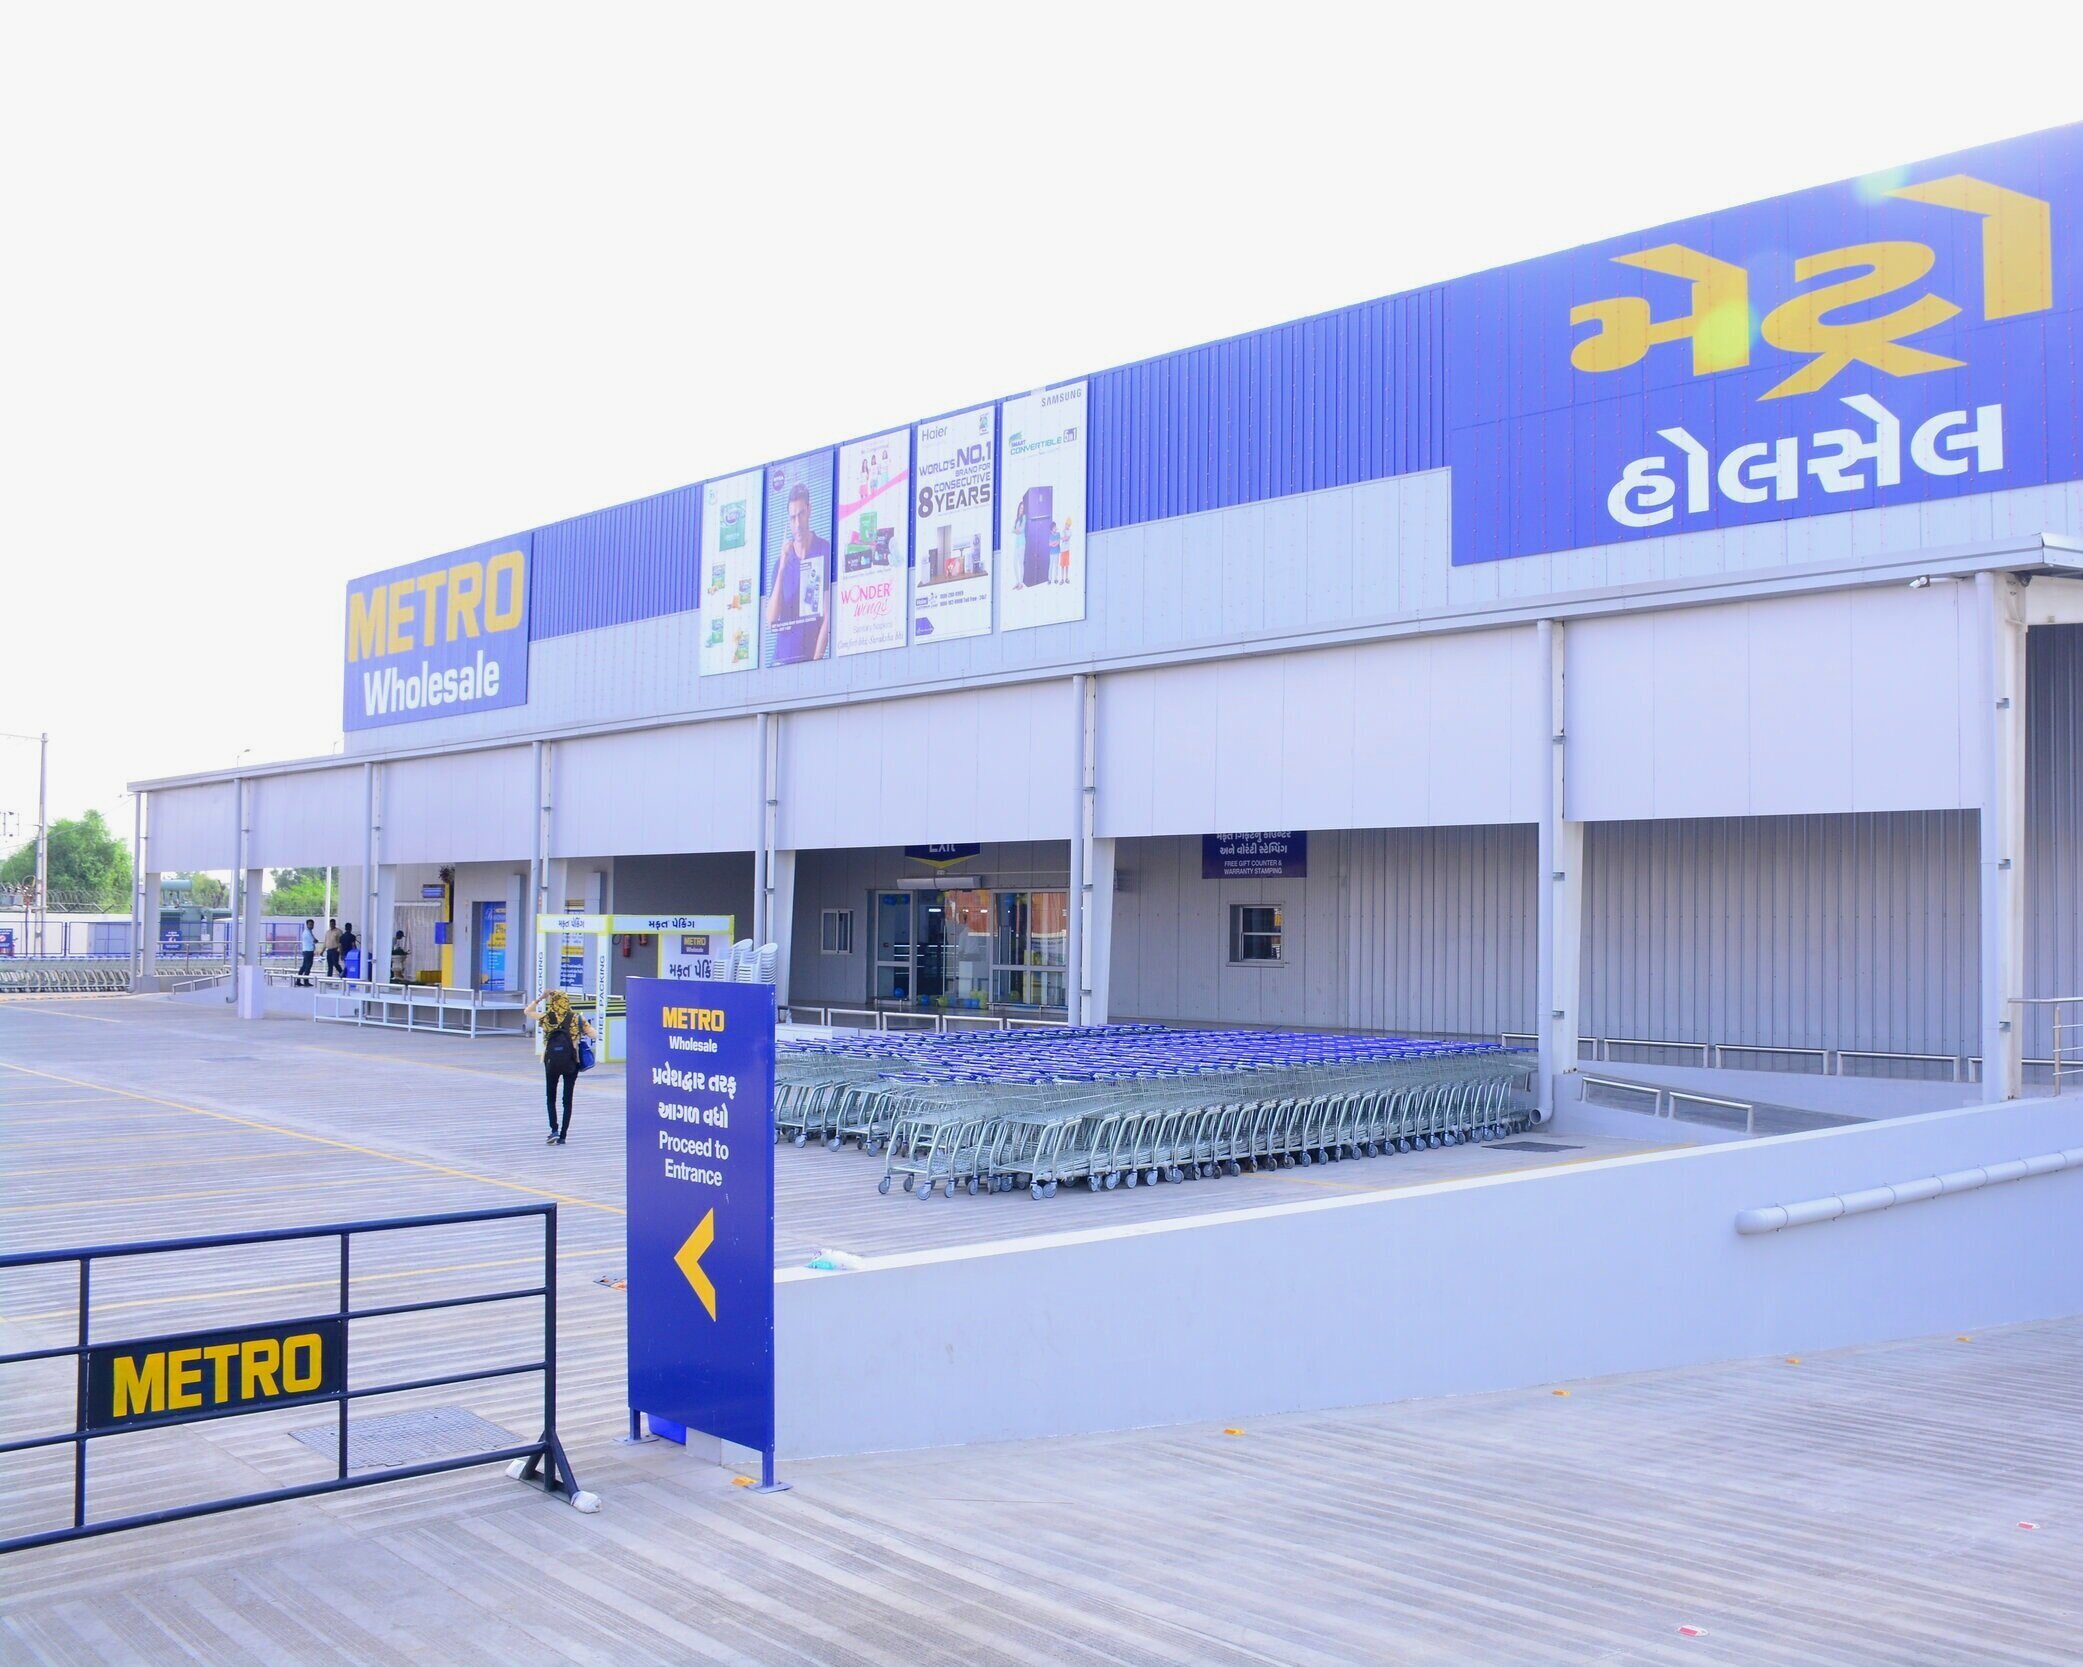 One of the 27 METRO stores in India, this branch is in Ahmedabad